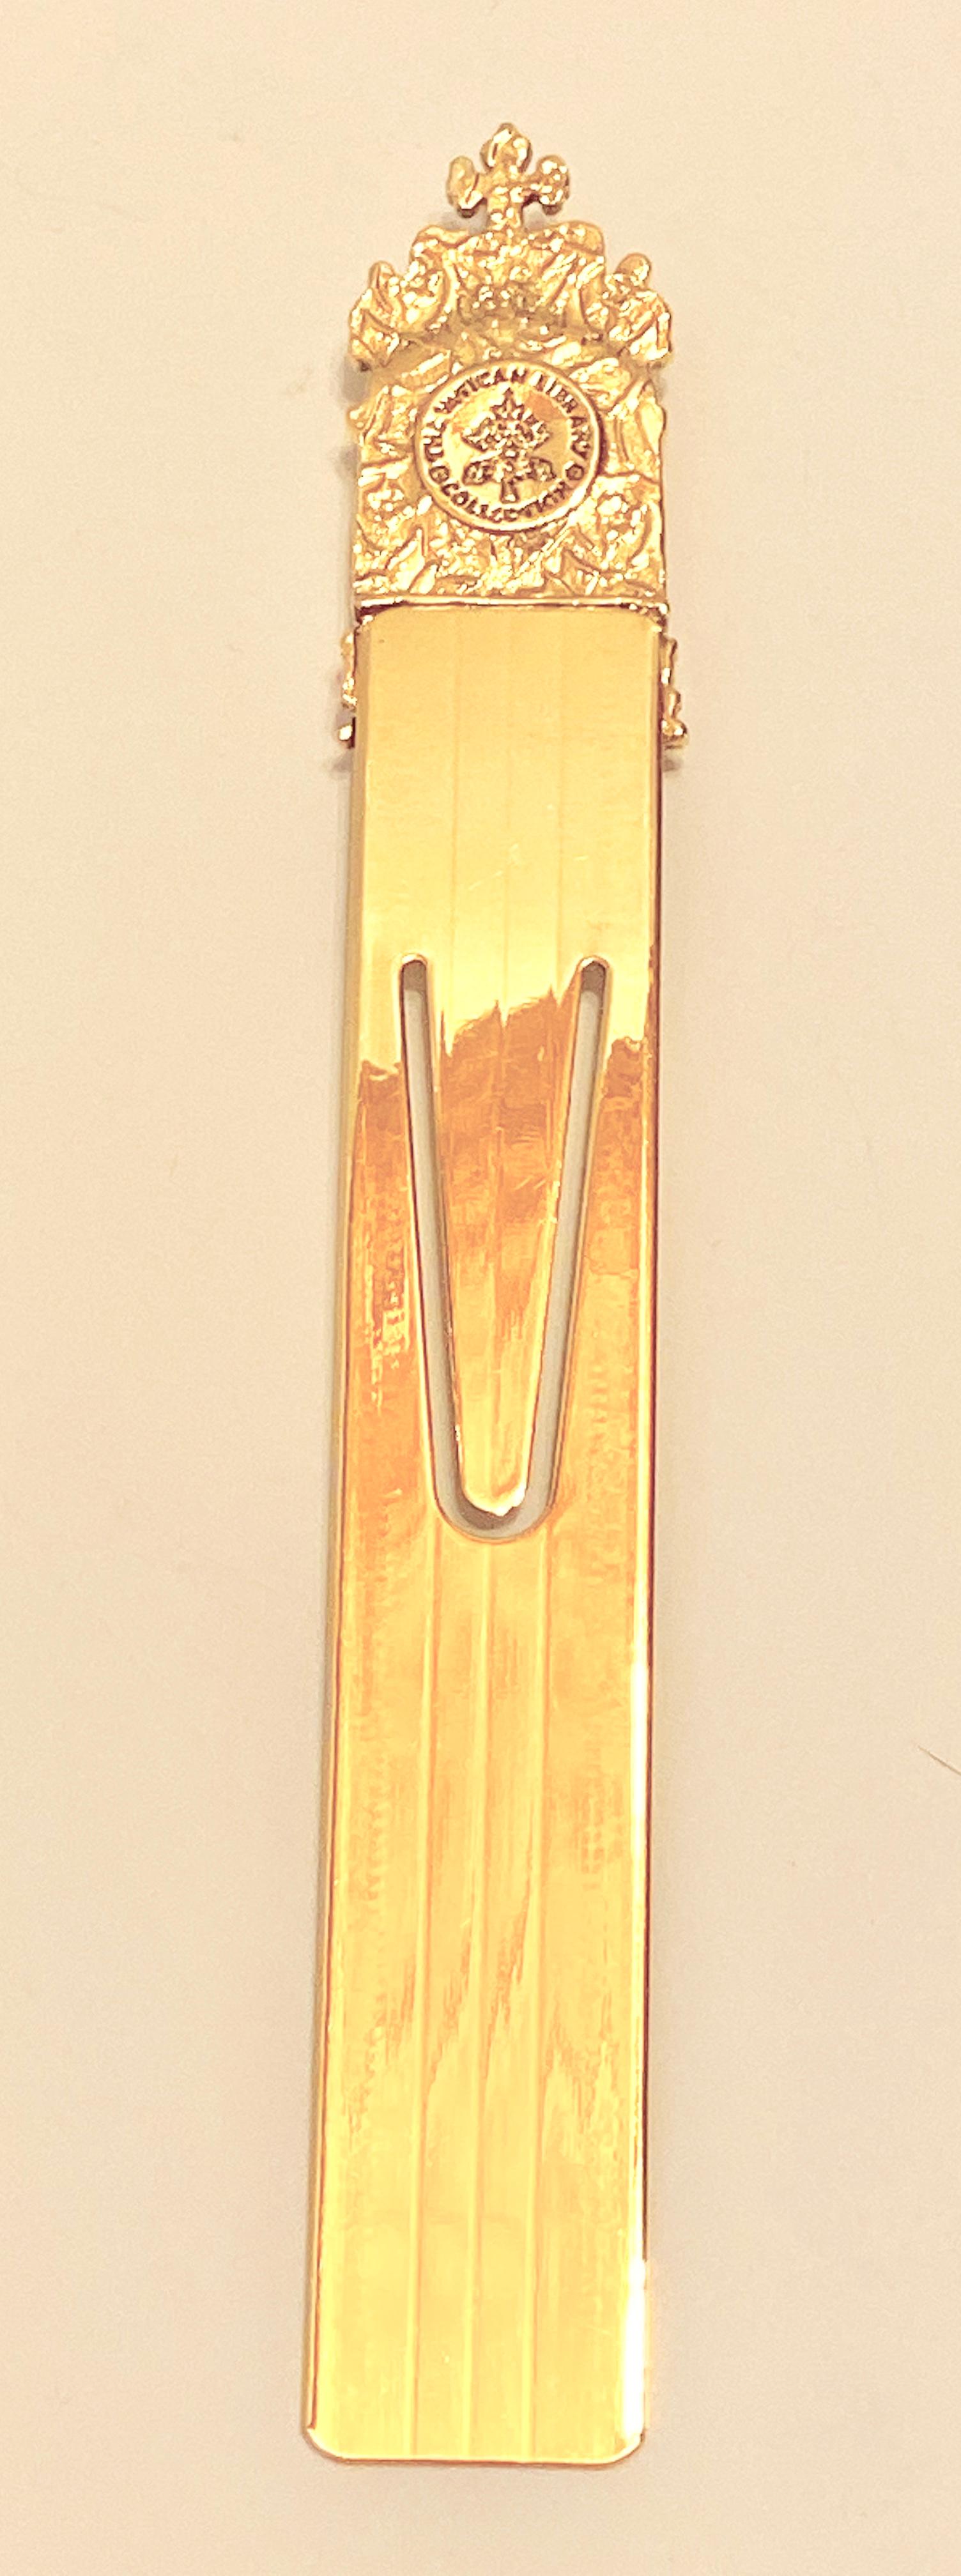 Finely polished gilded gold vermeil hardware Vatican Book Mark measures 6 inches by 1 inch. Delicate details of the Virgin Mary with Child. Made in Italy.